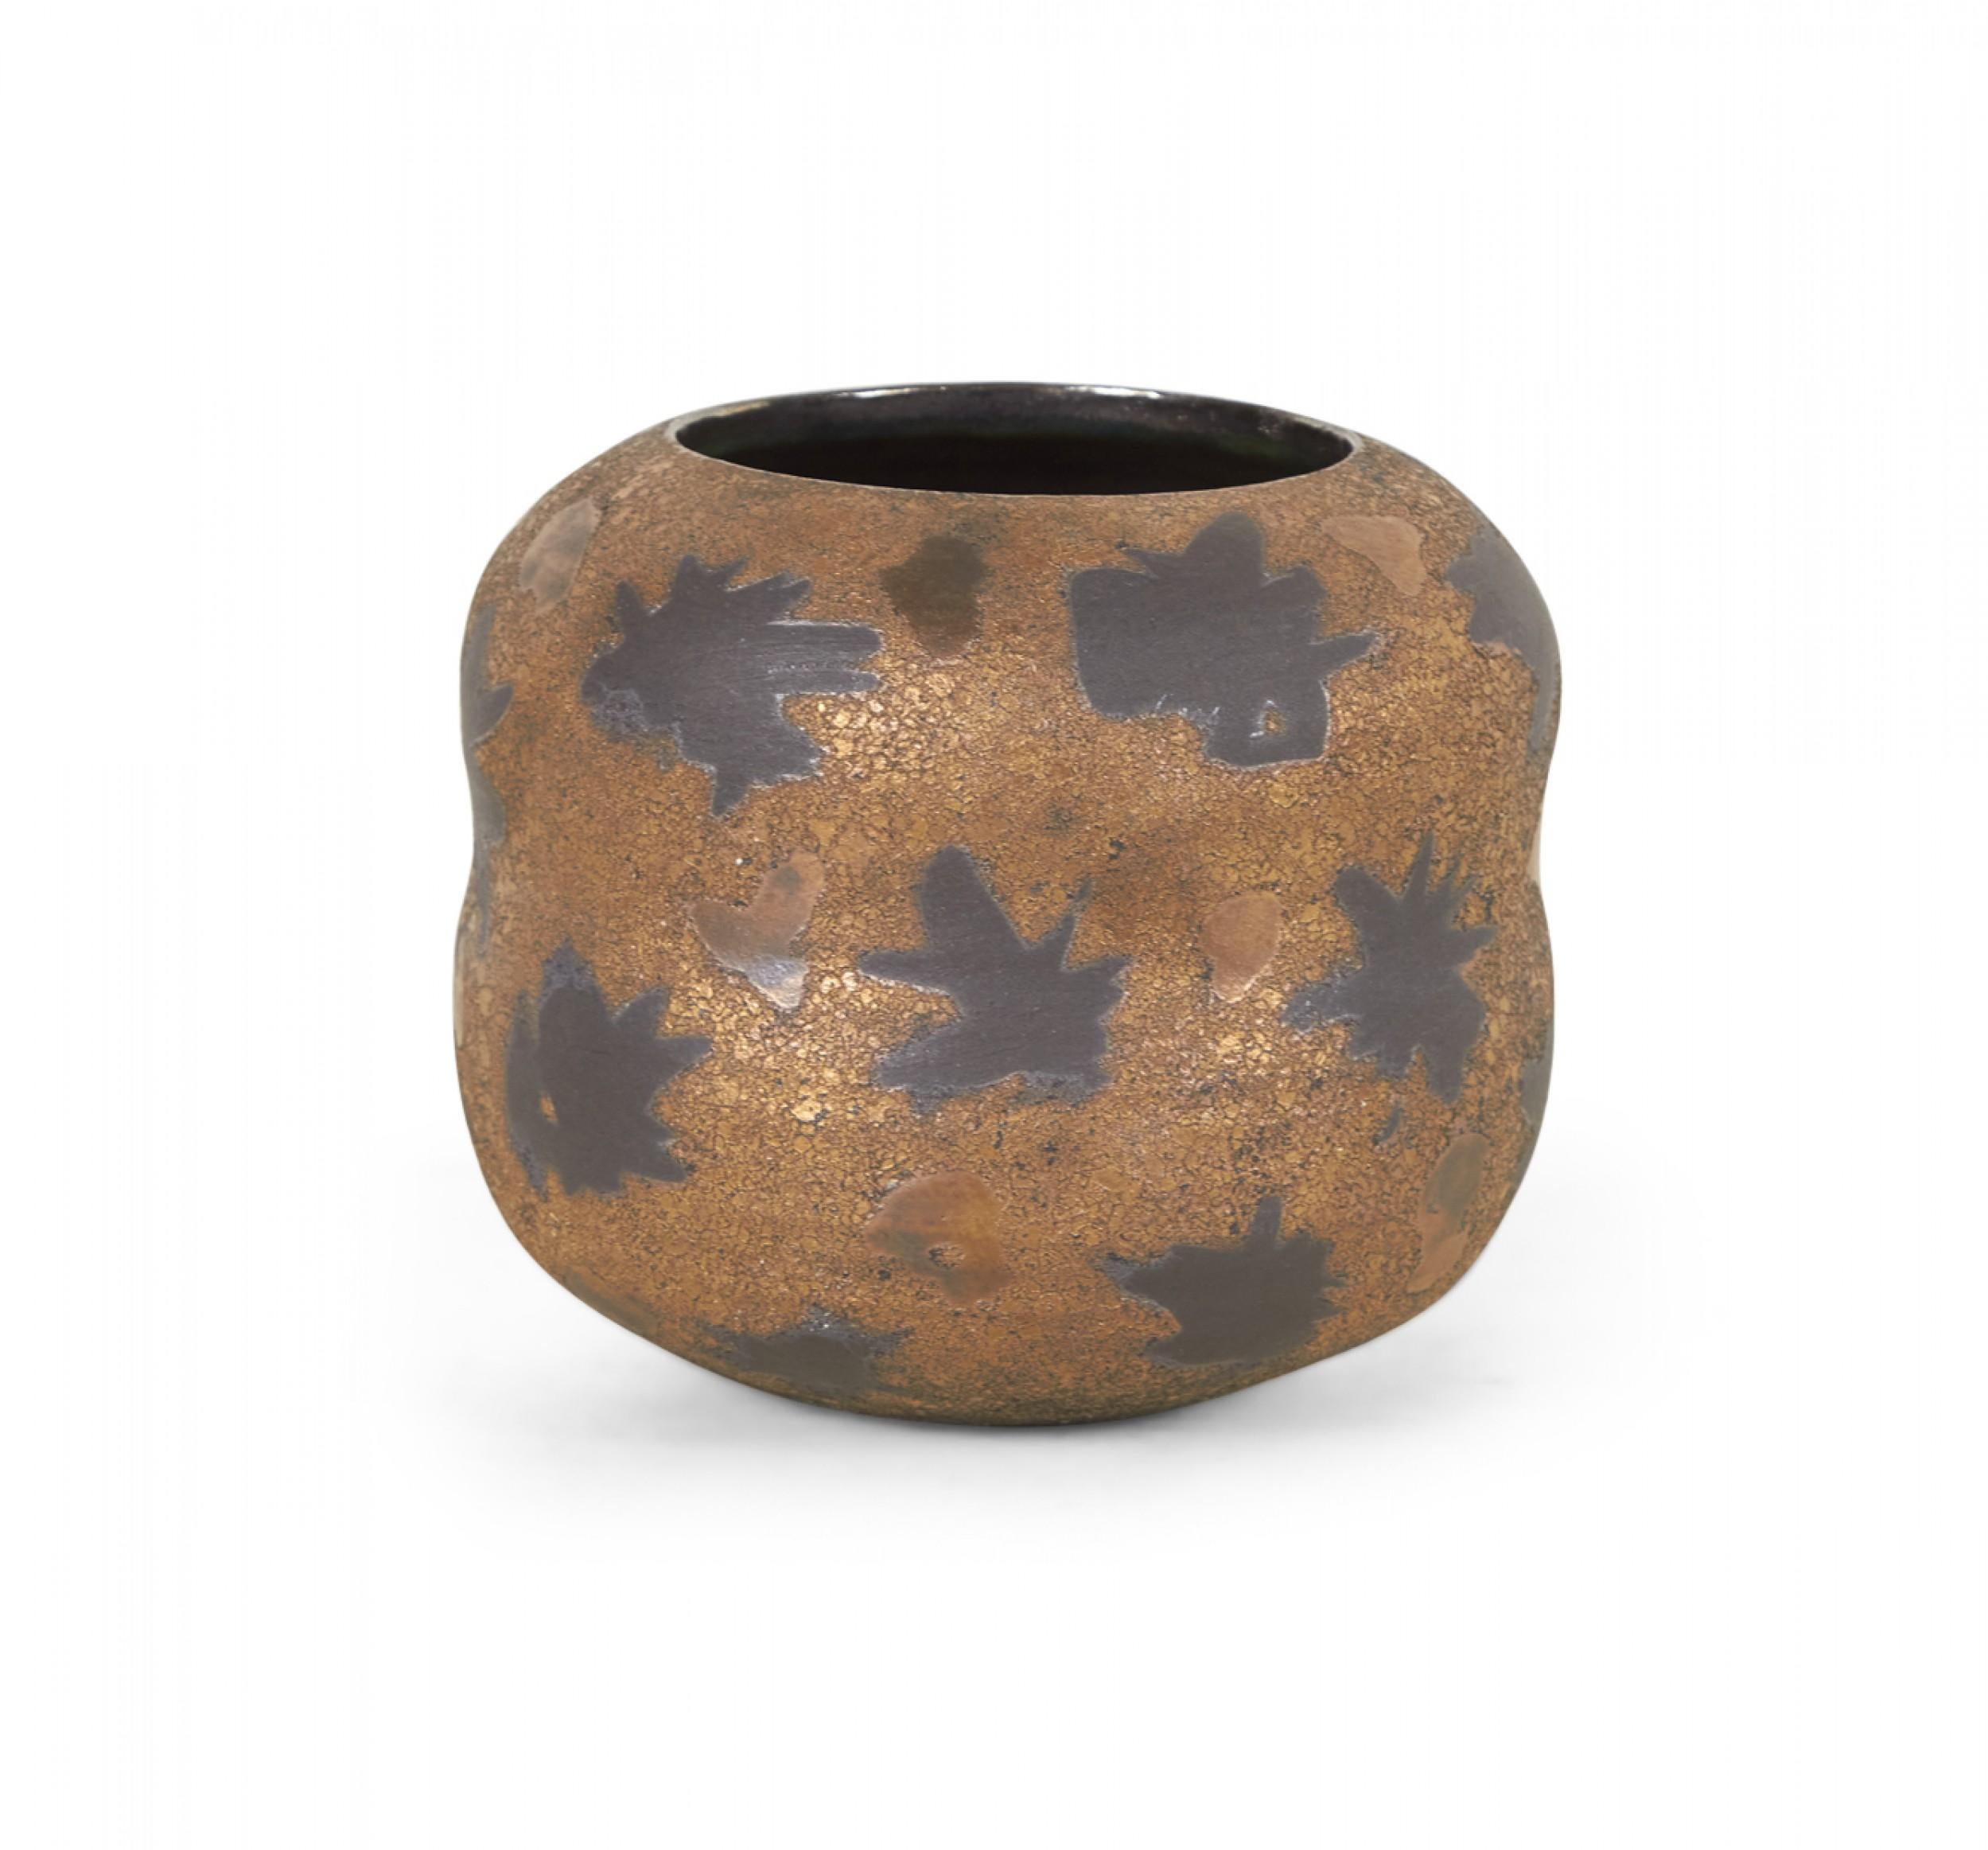 Contemporary thrown clay vase with a wide curved form with indented waist, a rounded lip and circular opening, and a black starburst pattern against a bronze and black textured glaze. (GARY DIPASQUALE).